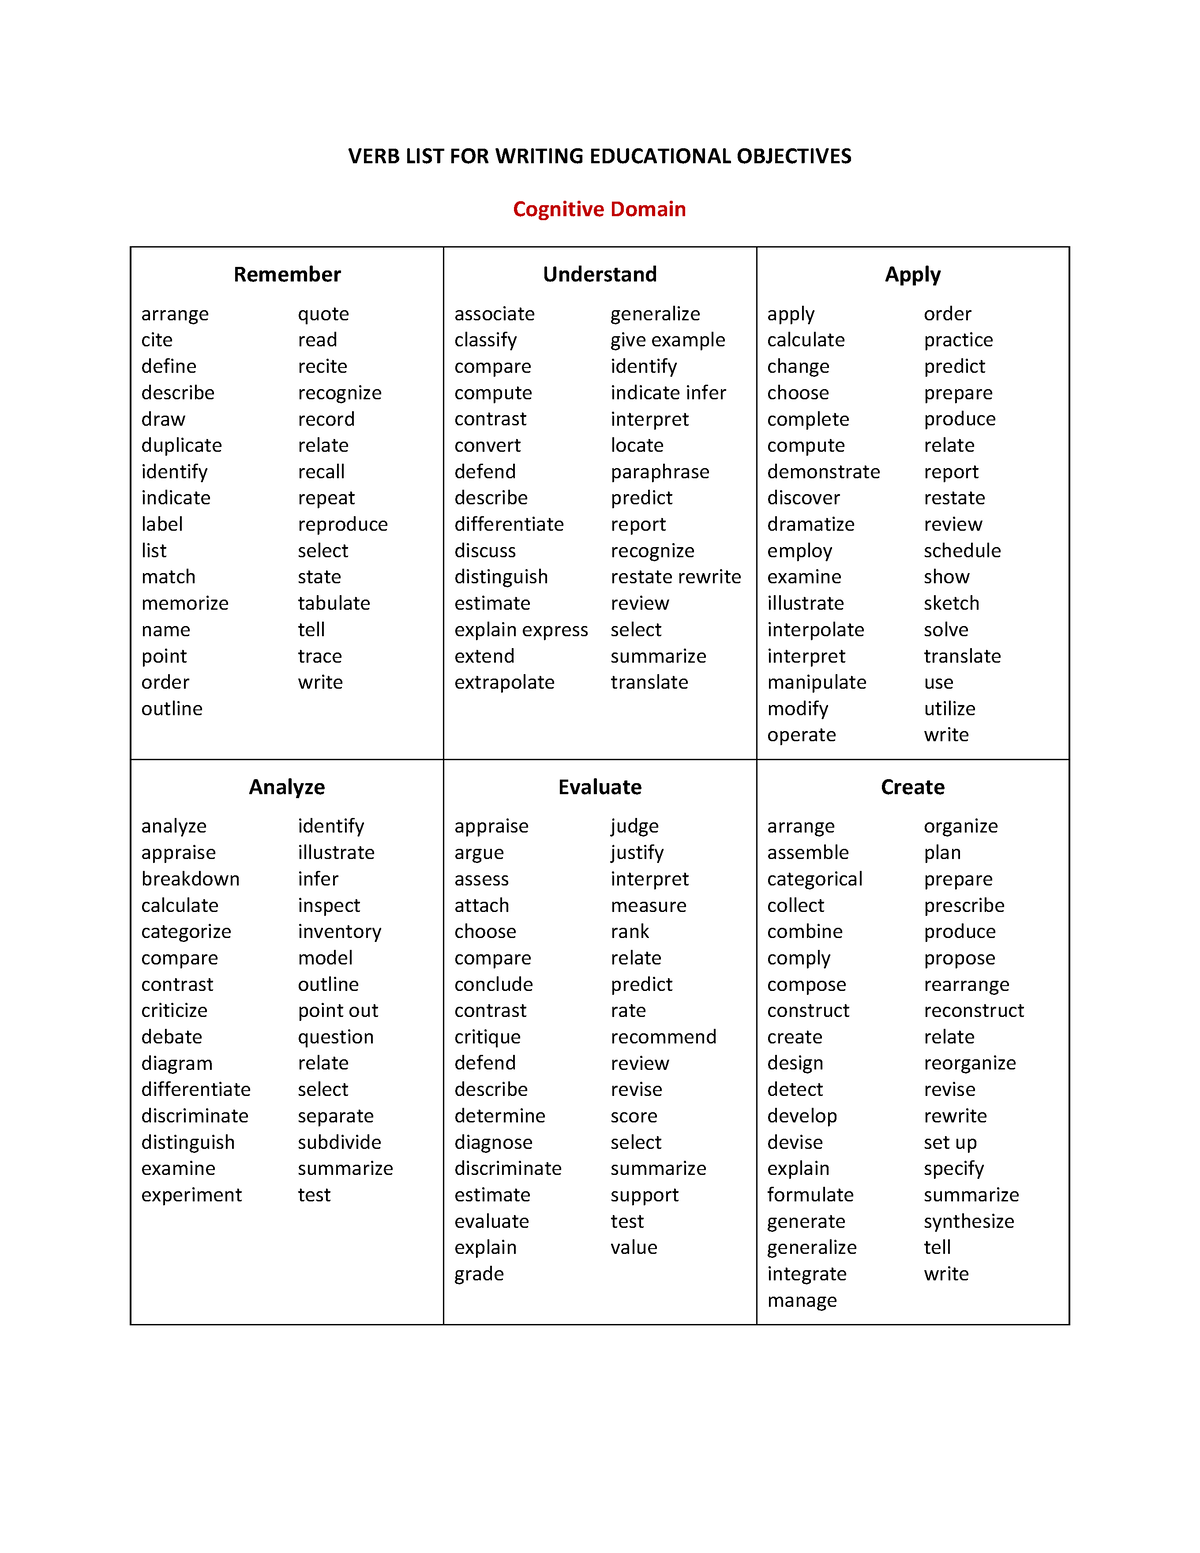 KSA Verbs - VERB LIST FOR WRITING EDUCATIONAL OBJECTIVES Cognitive ...